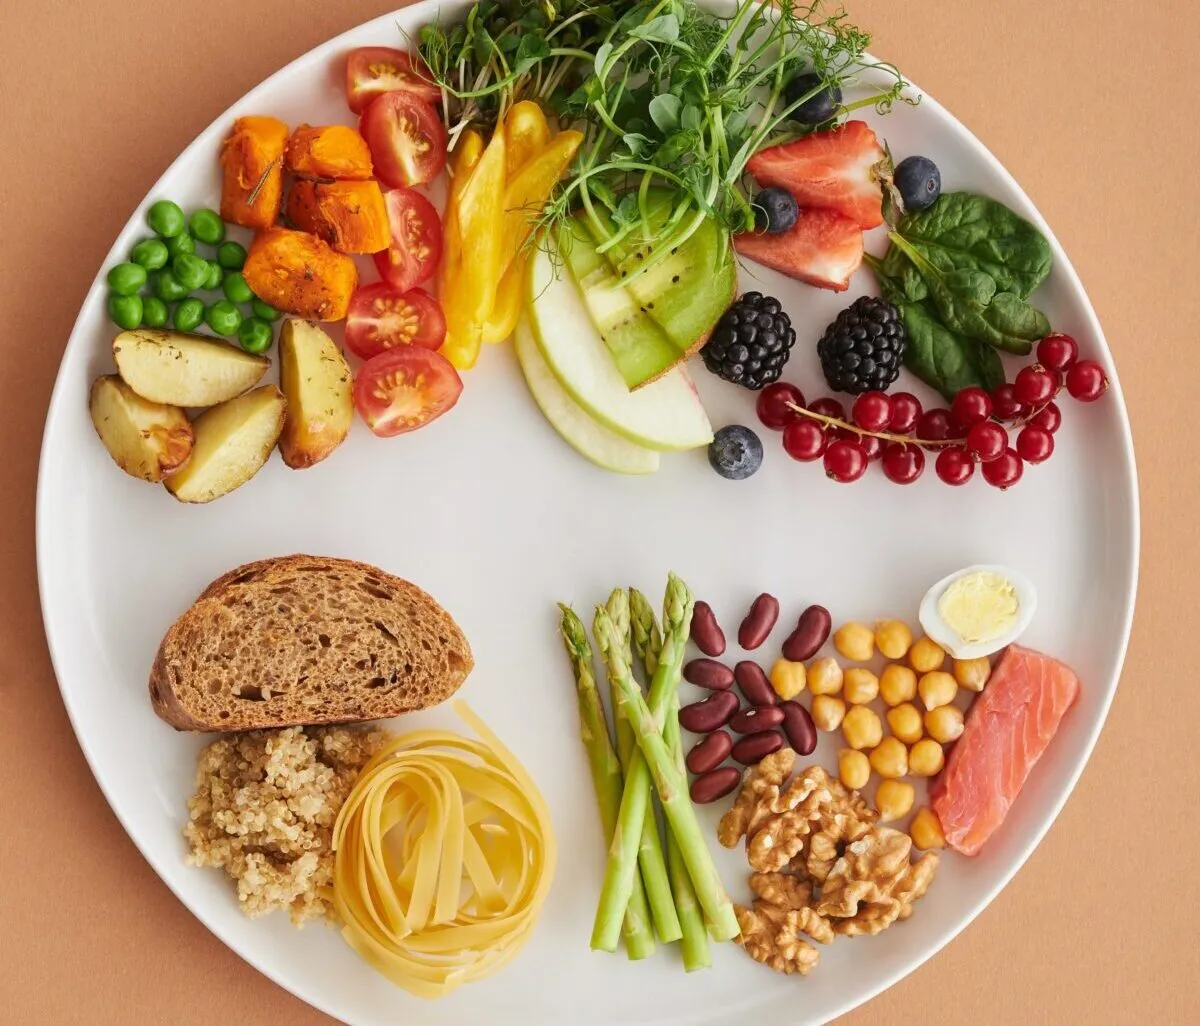 a plate filled with fruit, vegetables, fish and grains